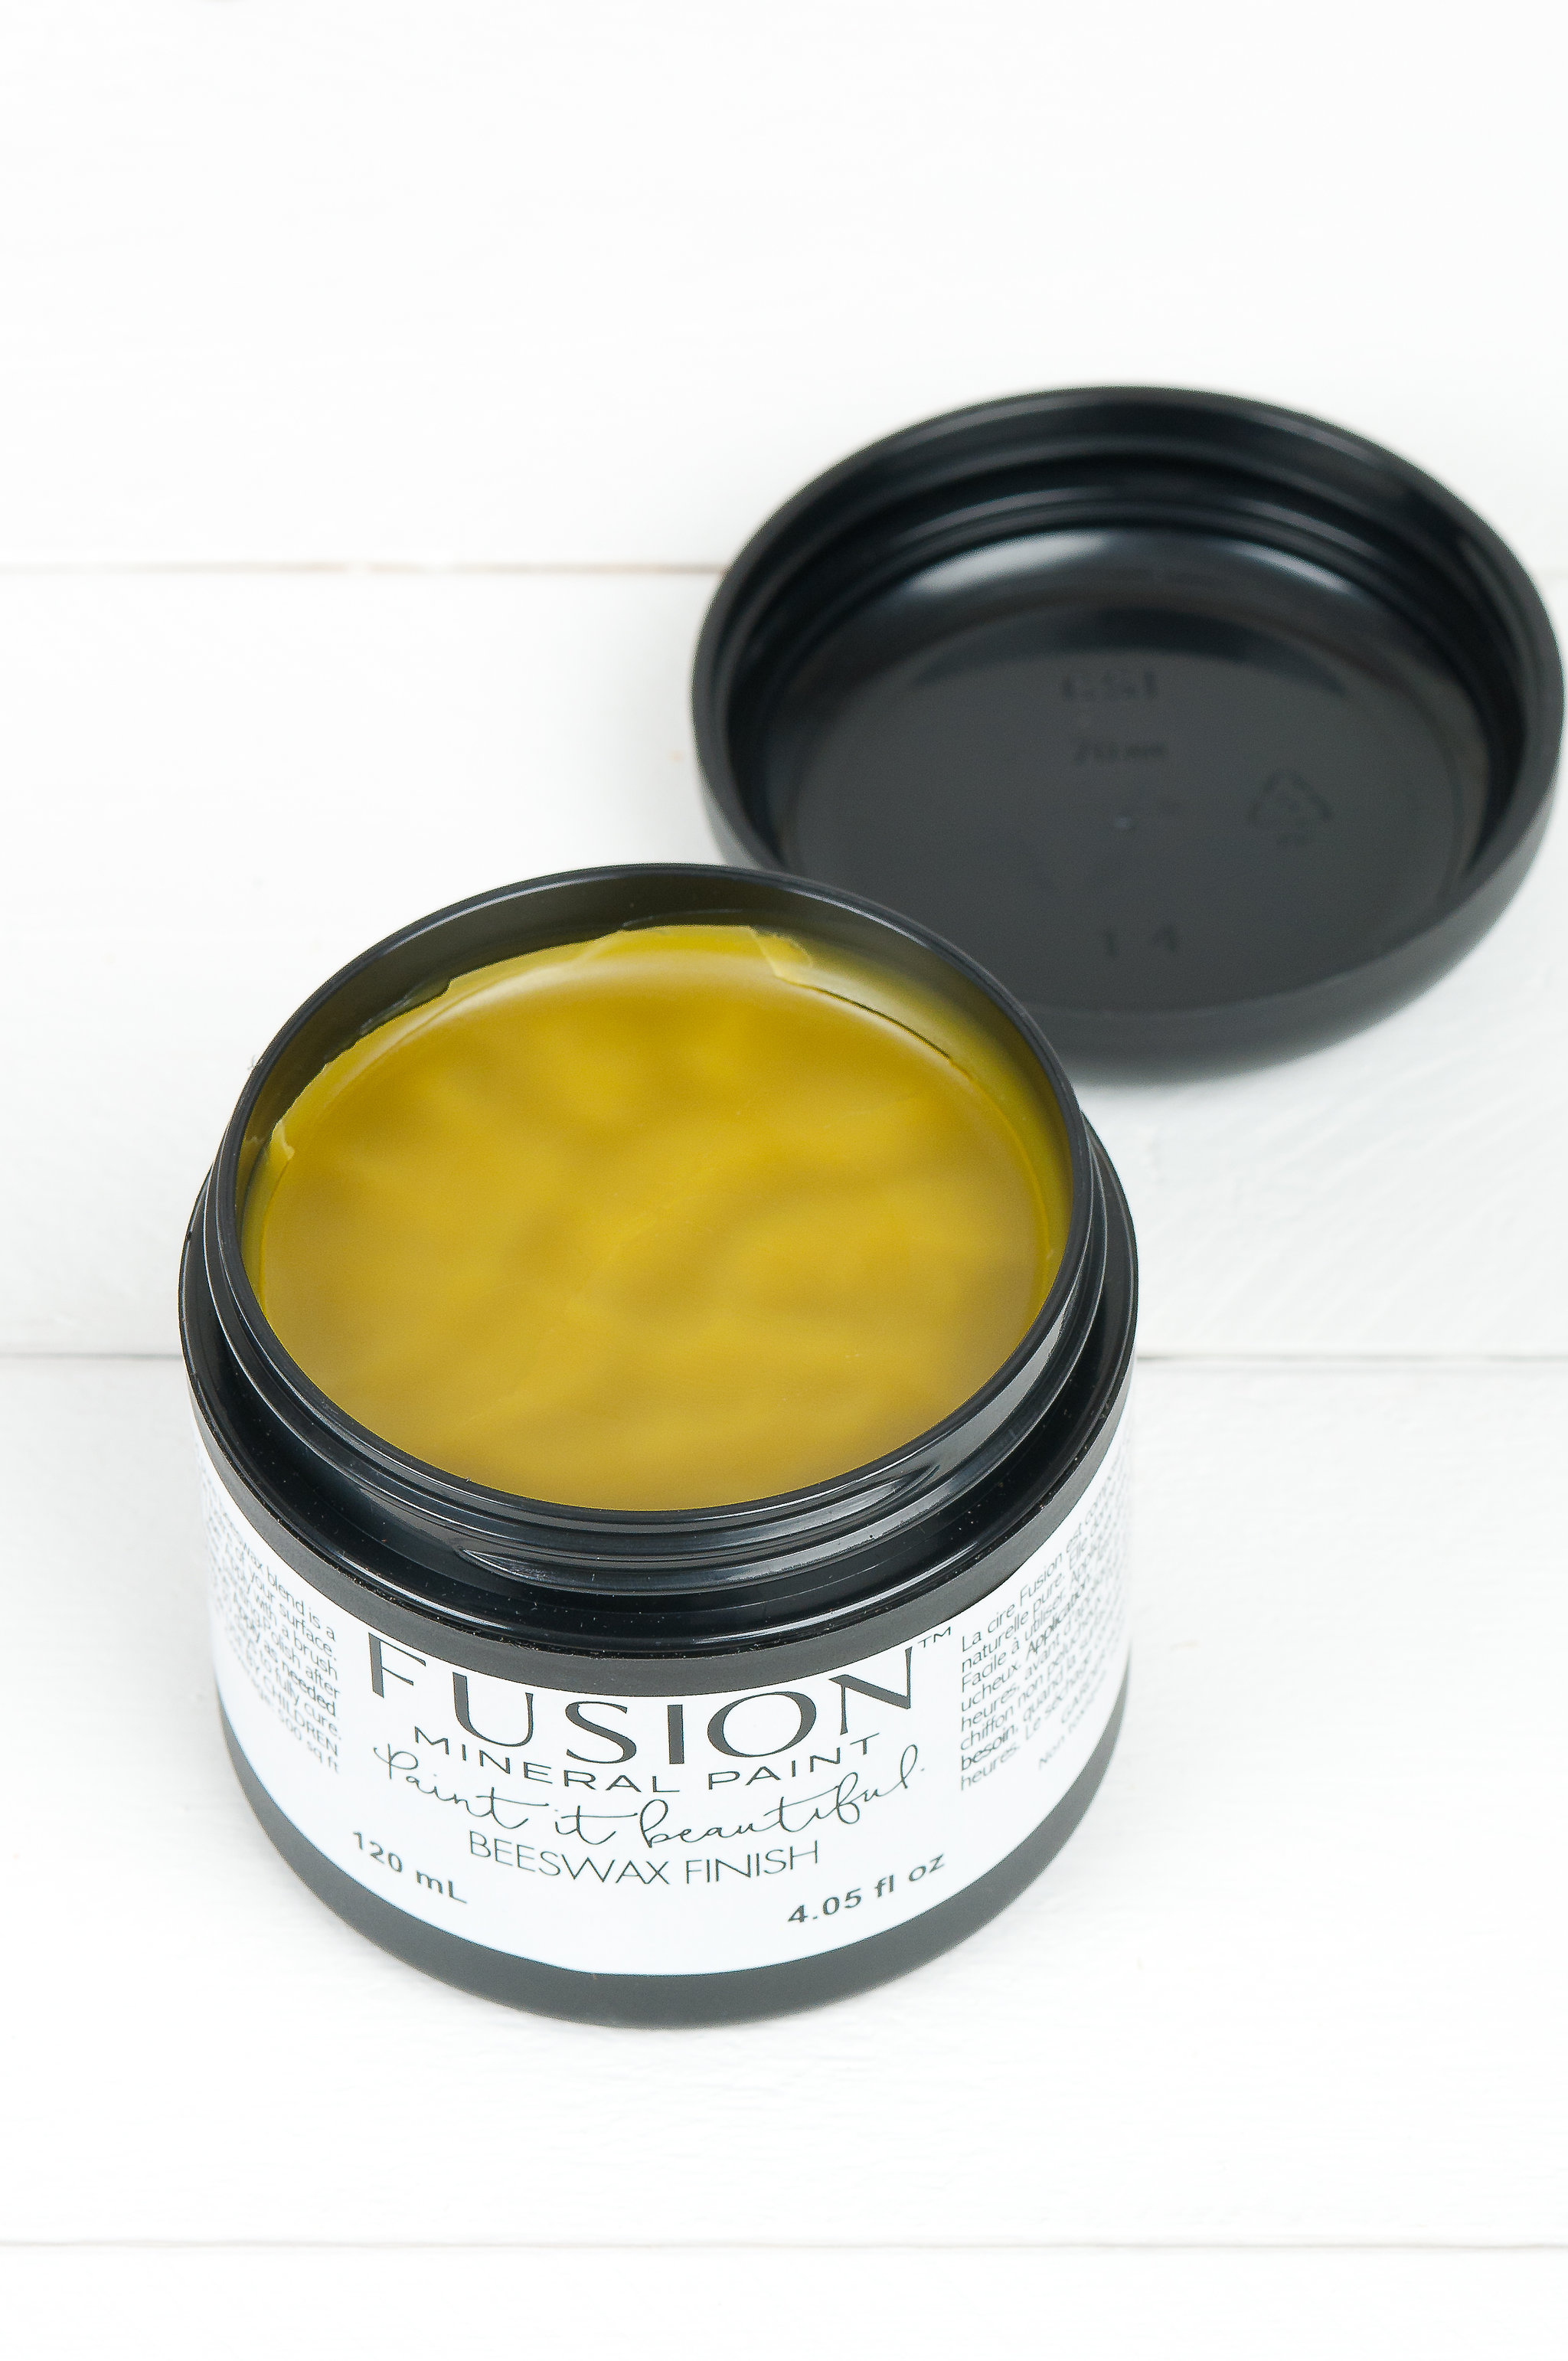 Fusion Mineral Paint Beeswax Finish is a unique product with a satin finish. | fusionmineralpaint.com